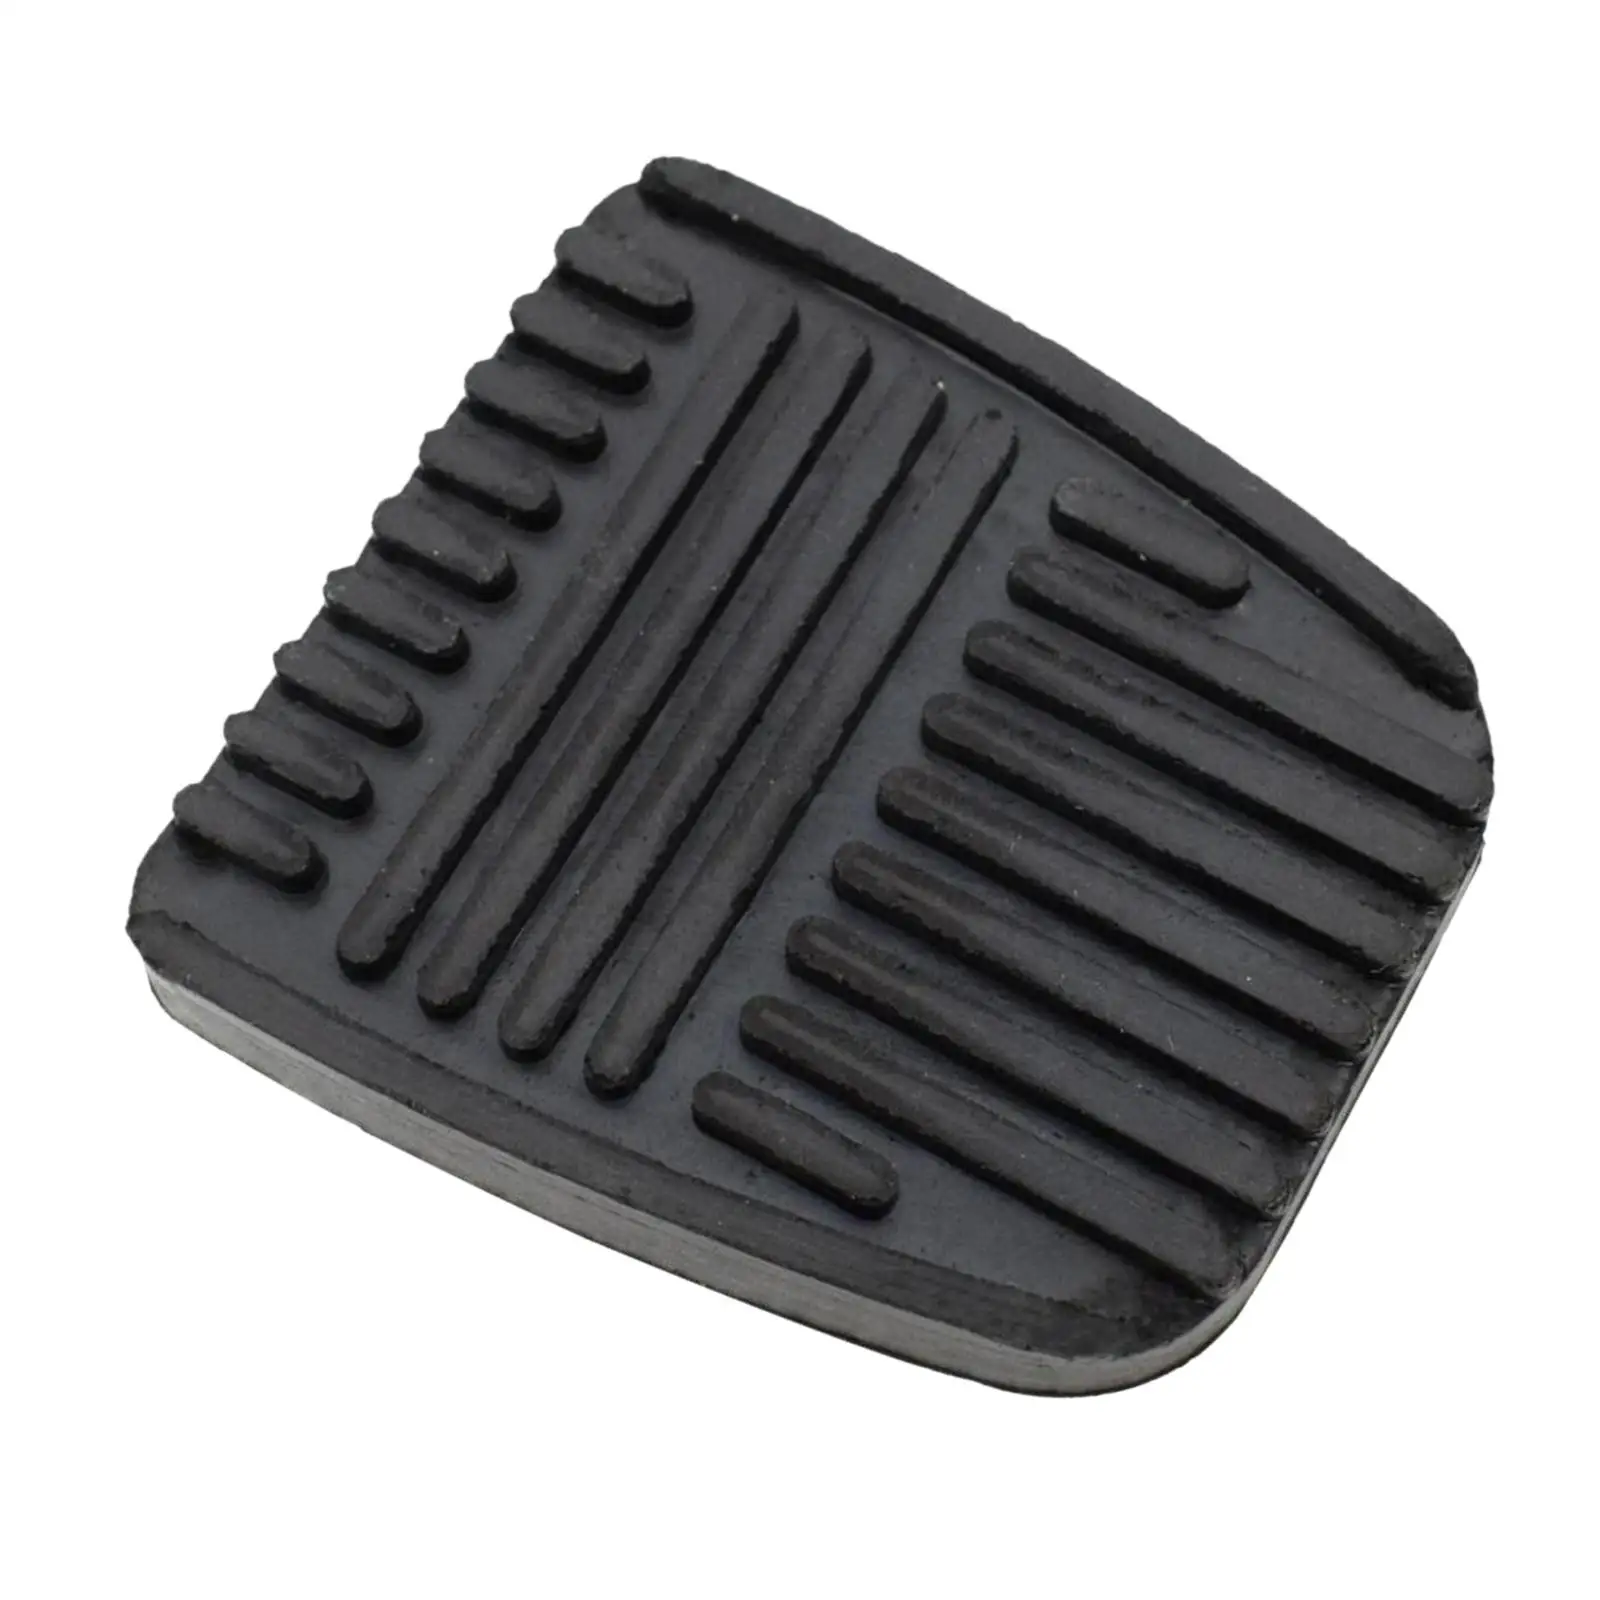 Brake Pedal Rubber Pad 31321-14020 Black Auto Accessory Brake Pedal Pad Replacement for Tercel